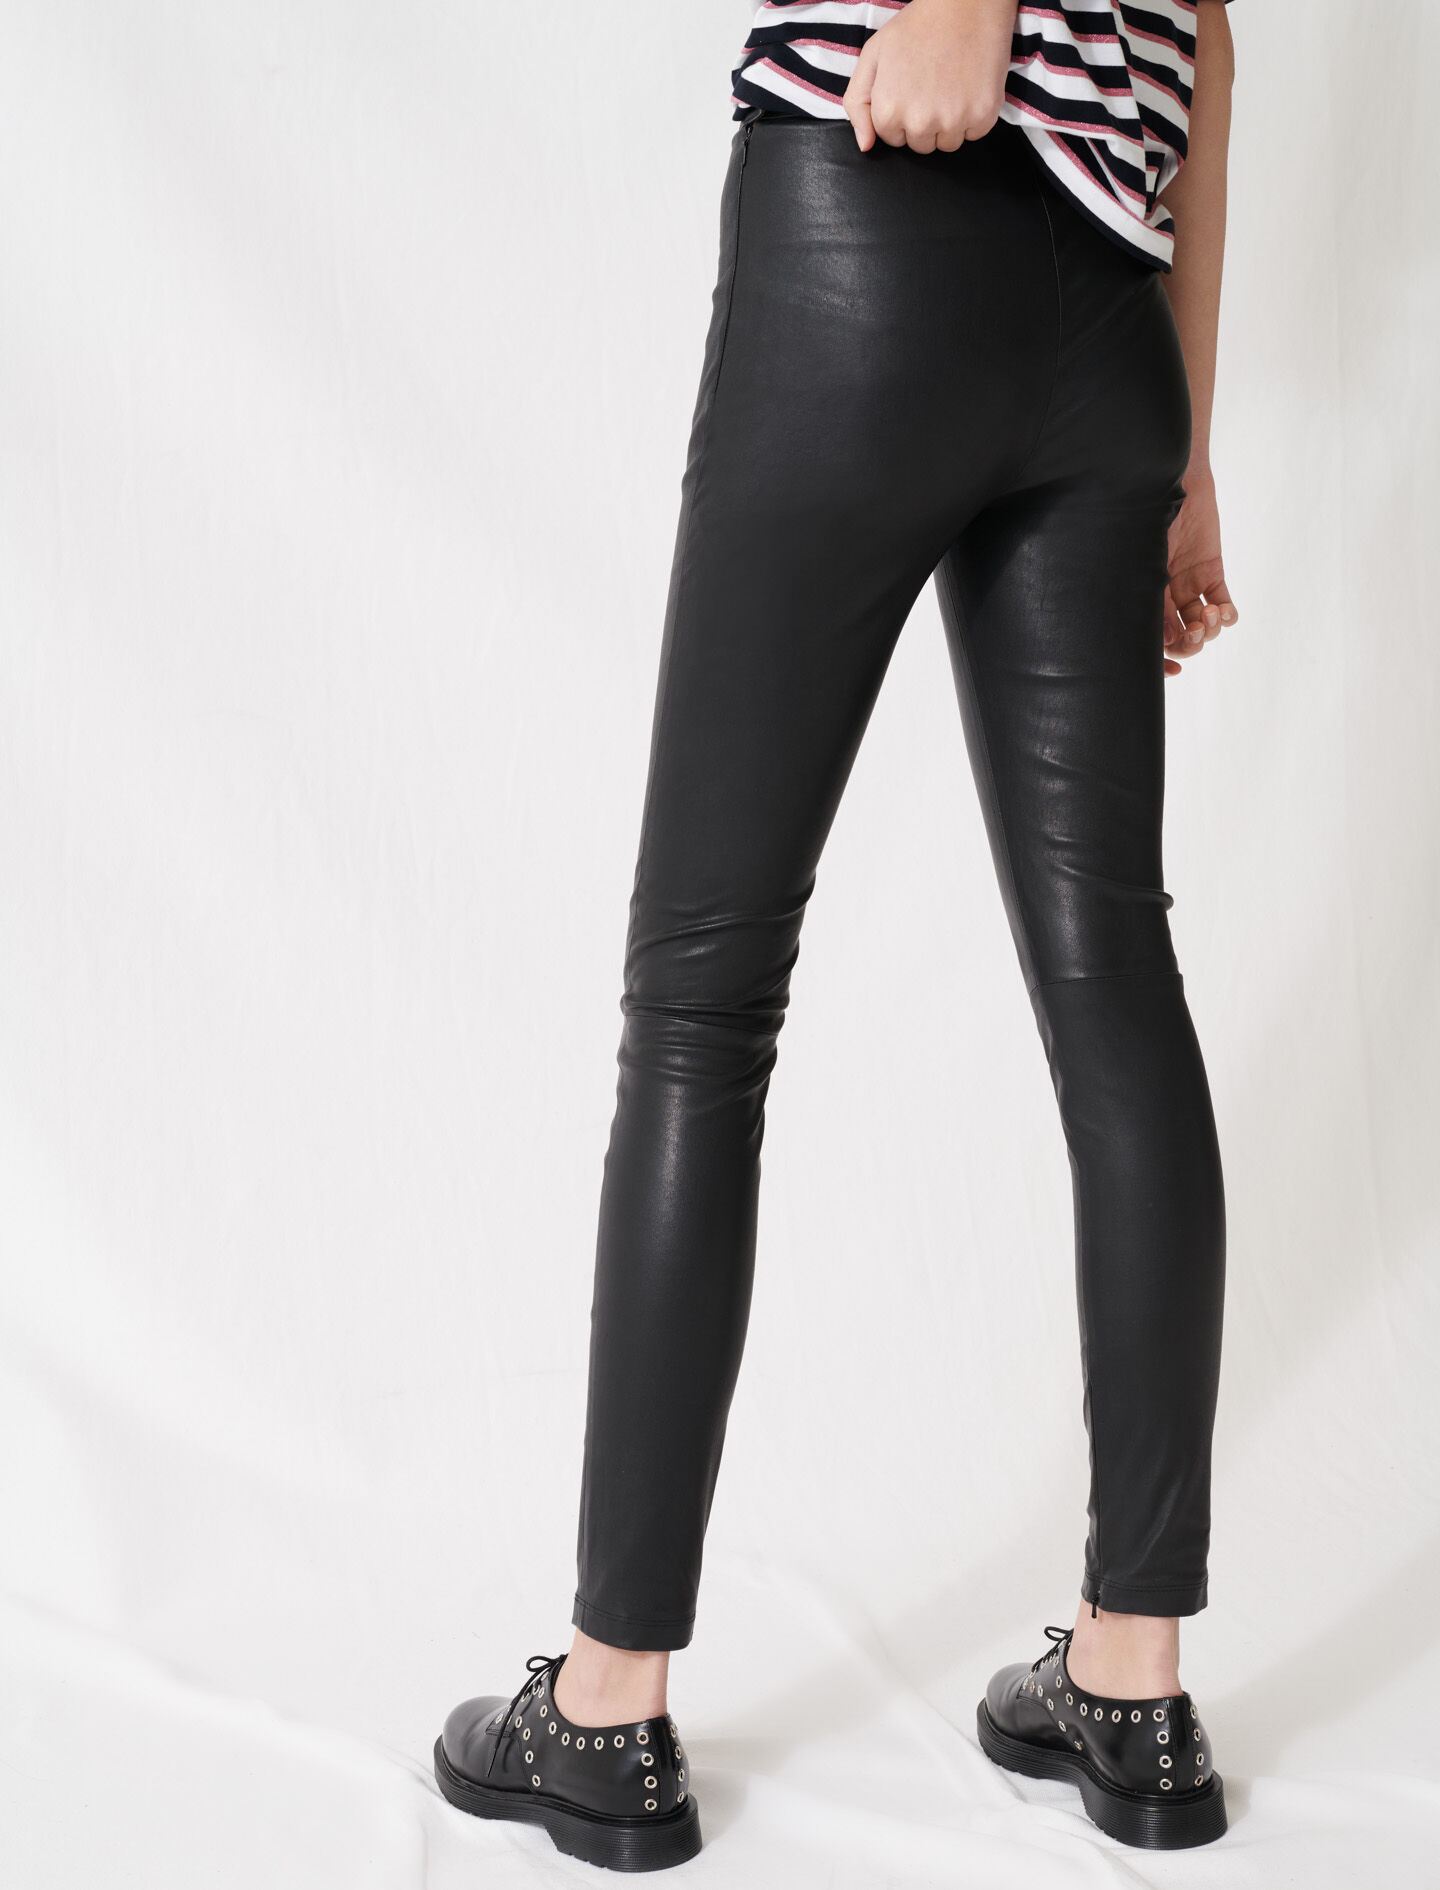 high waisted leather jeggings